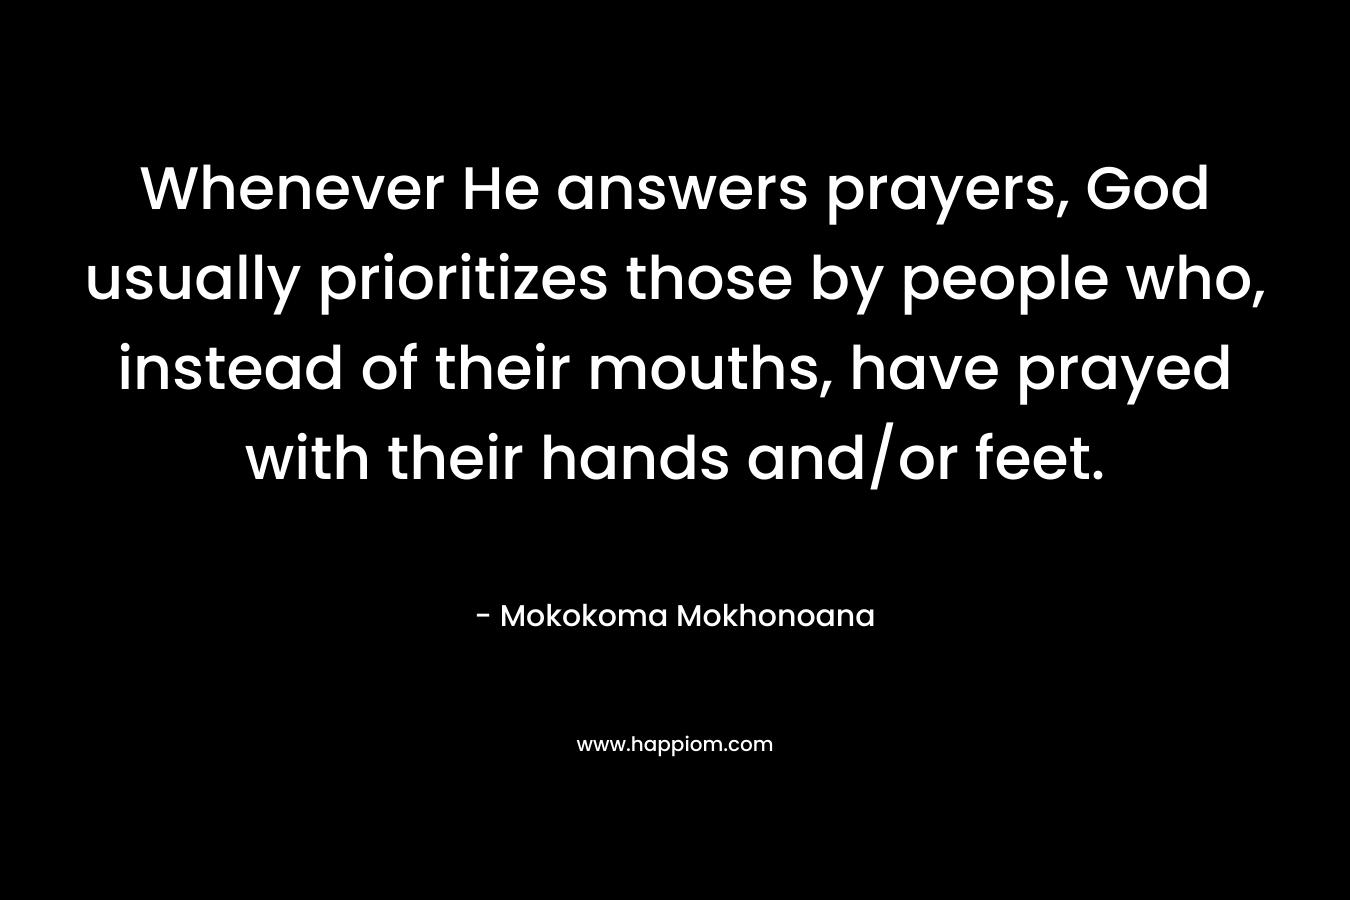 Whenever He answers prayers, God usually prioritizes those by people who, instead of their mouths, have prayed with their hands and/or feet.